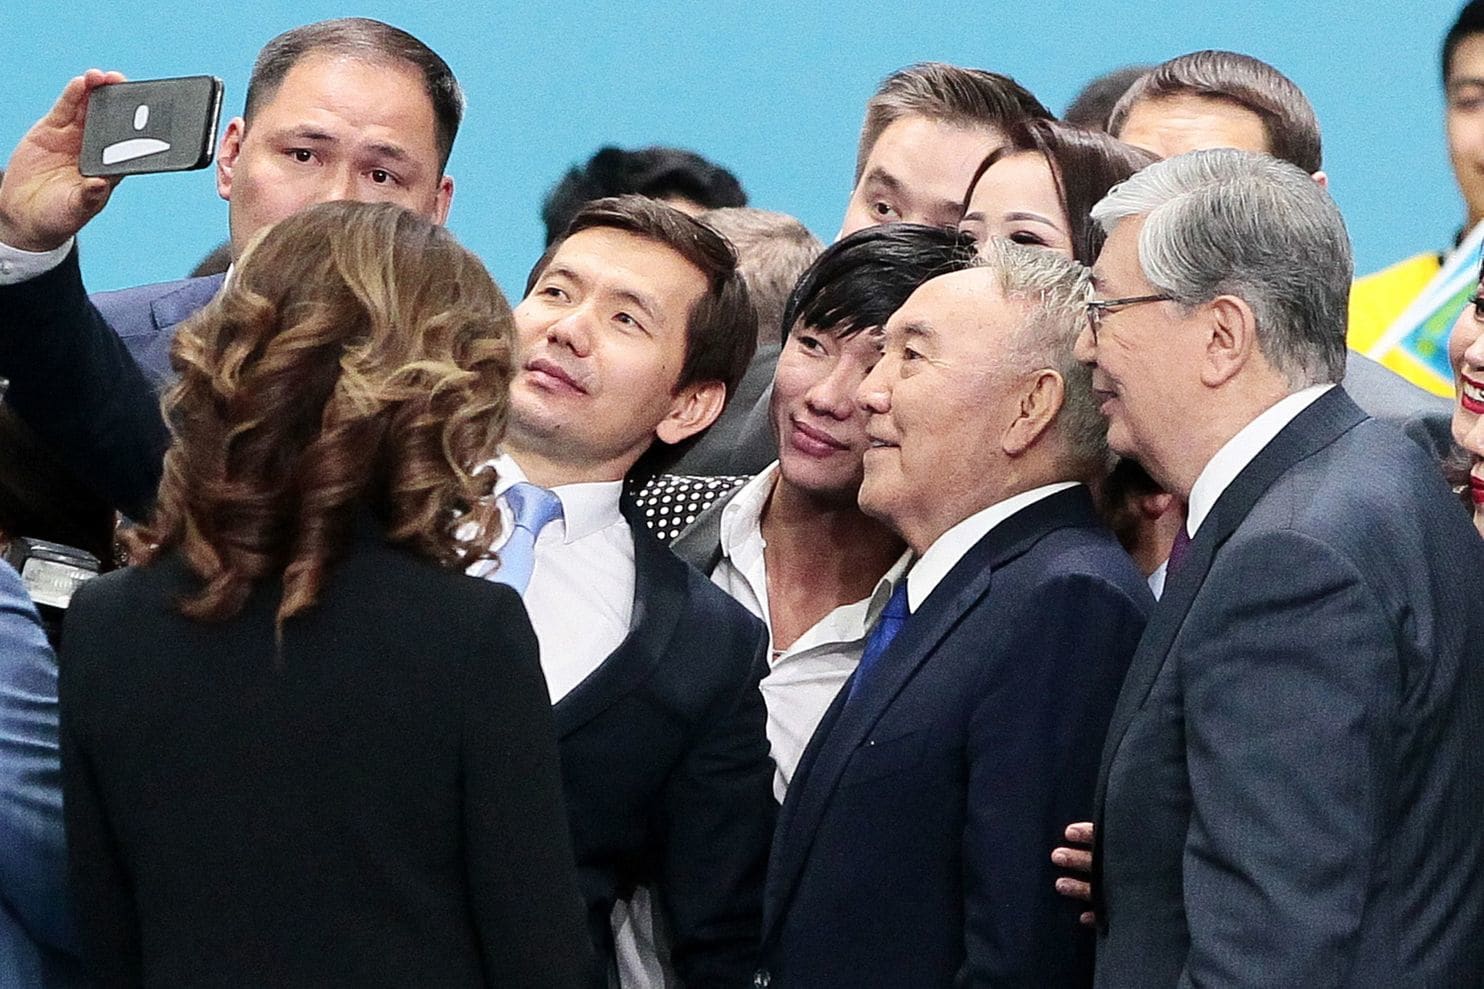 Former Kazakh president Nursultan Nazarbayev and President Kassym-Jomart Tokayev pose for photos Tuesday during a congress of the ruling party. (Stanislav Filippov/AFP/Getty Images)